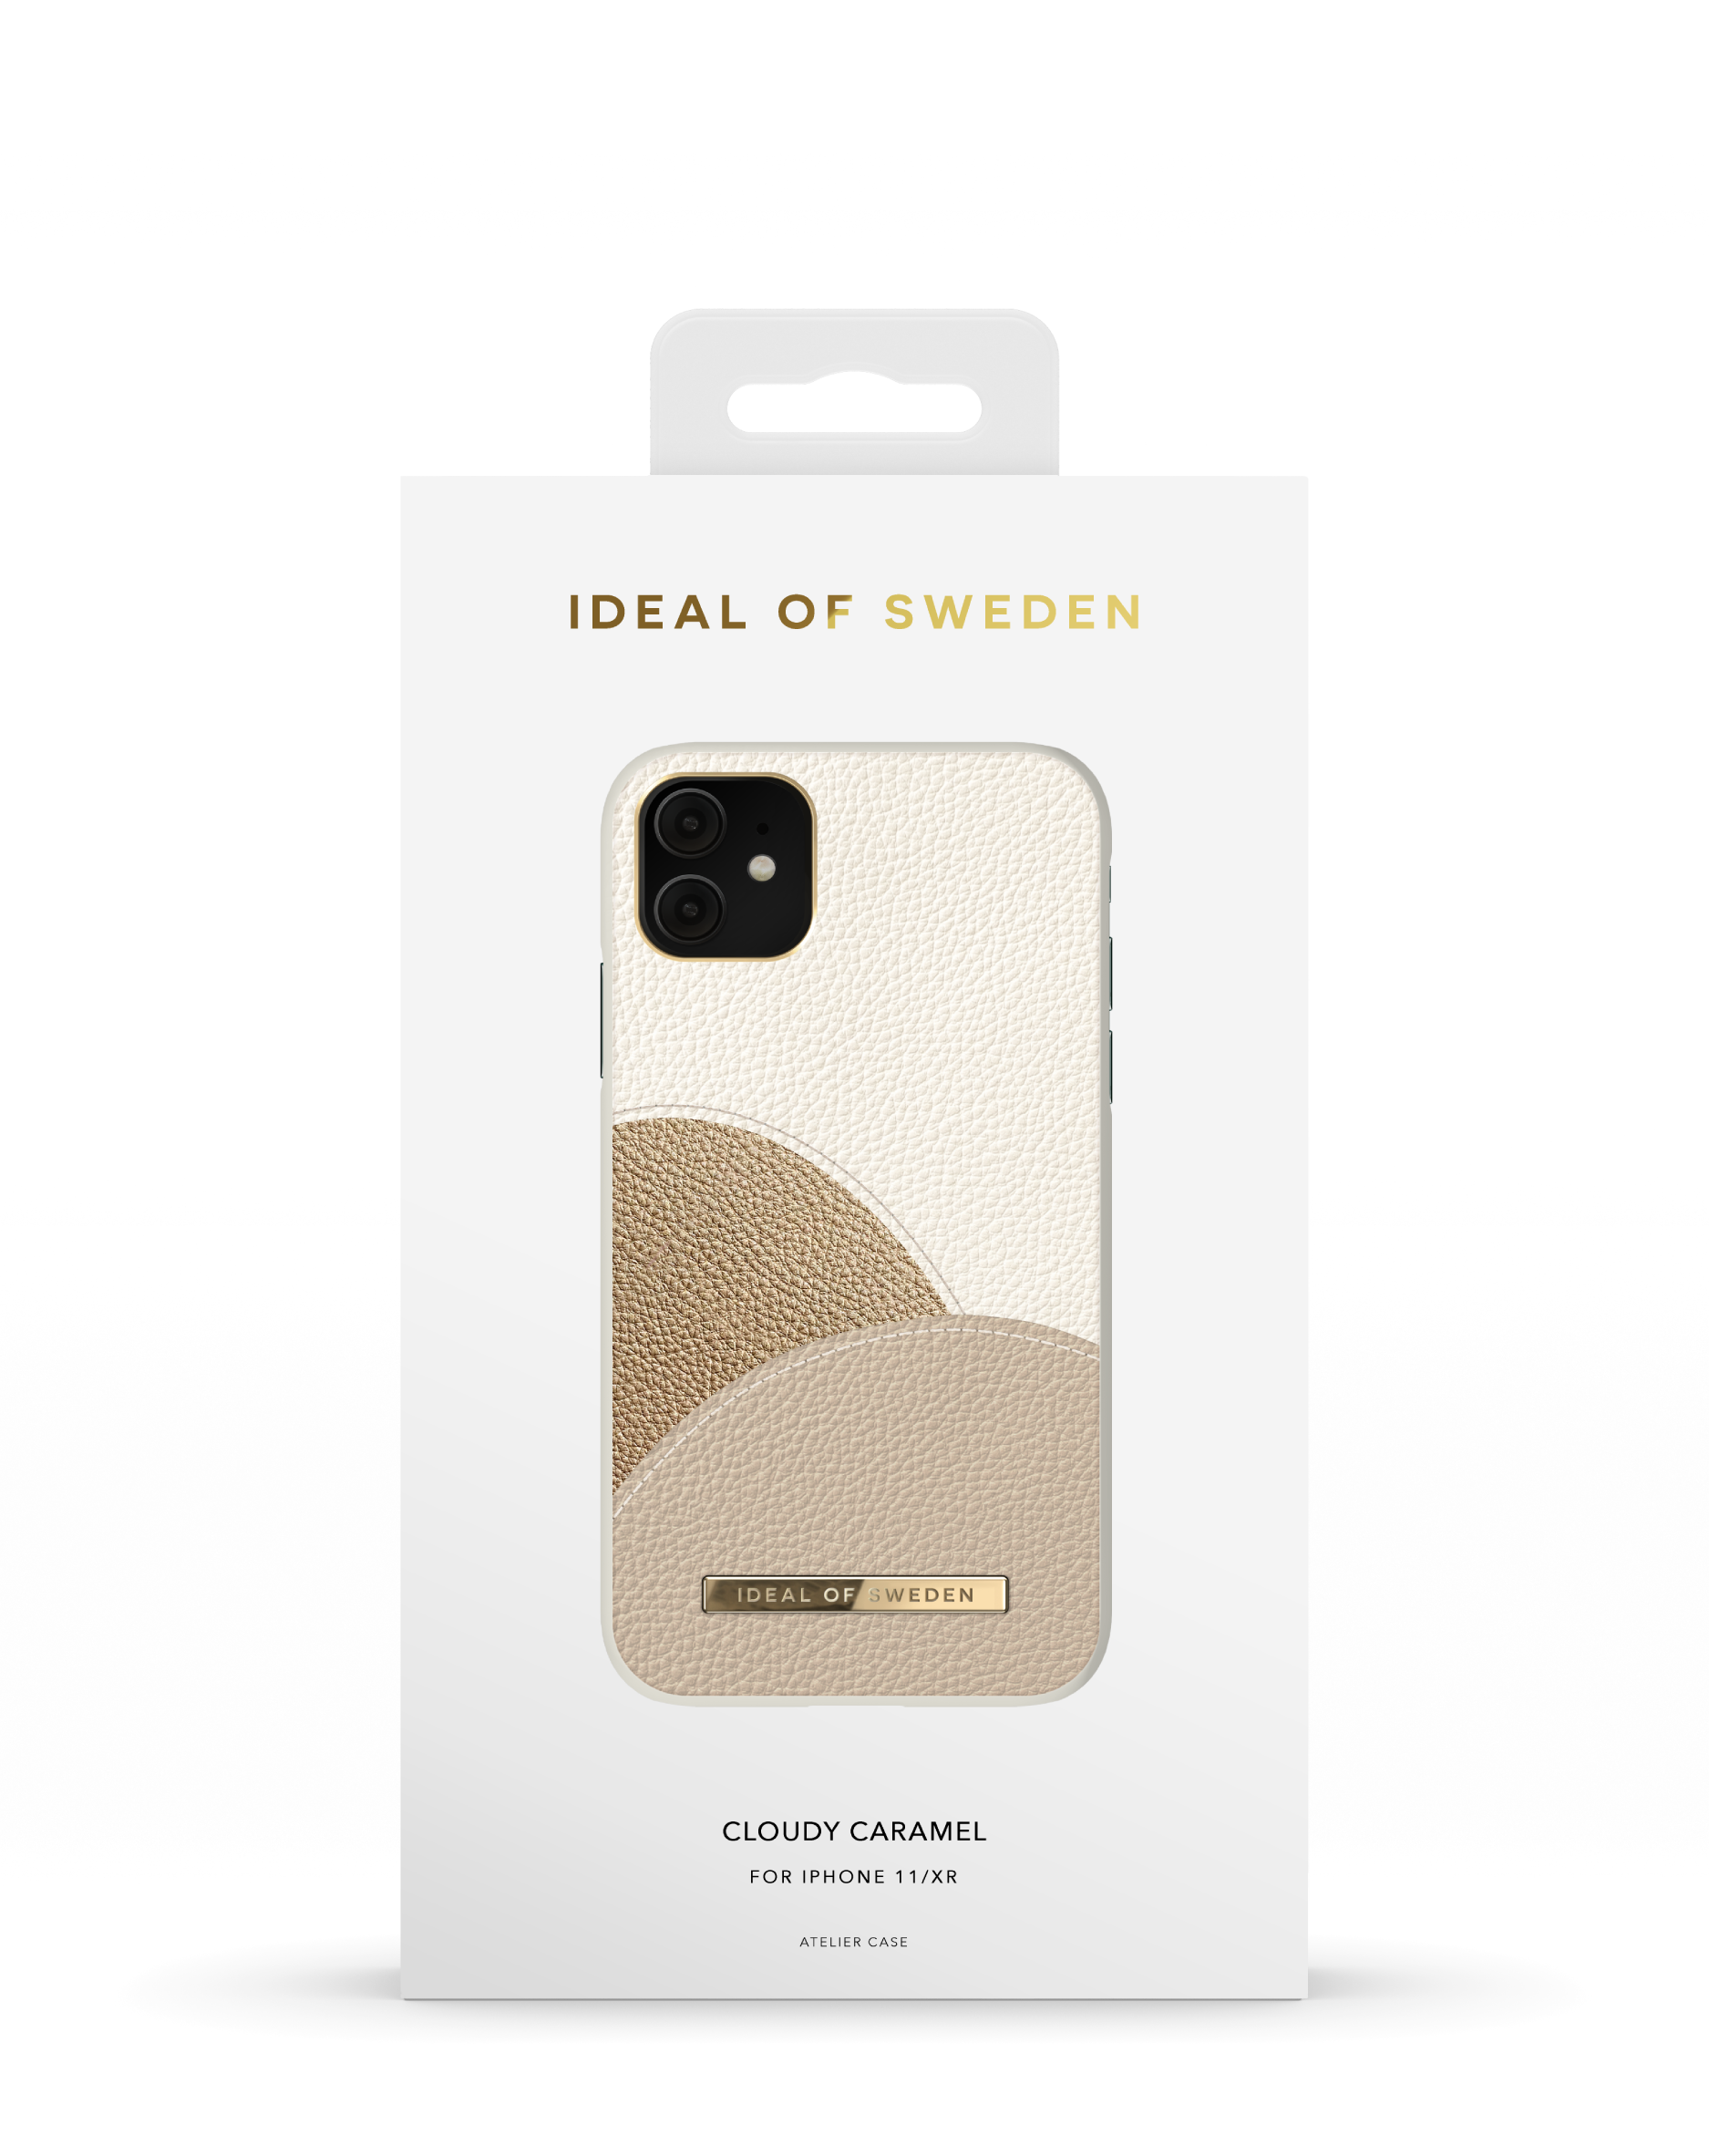 Backcover, IDACSS20-I1961-214, Apple, iPhone 11, Cloudy SWEDEN OF IDEAL Caramel iPhone XR,